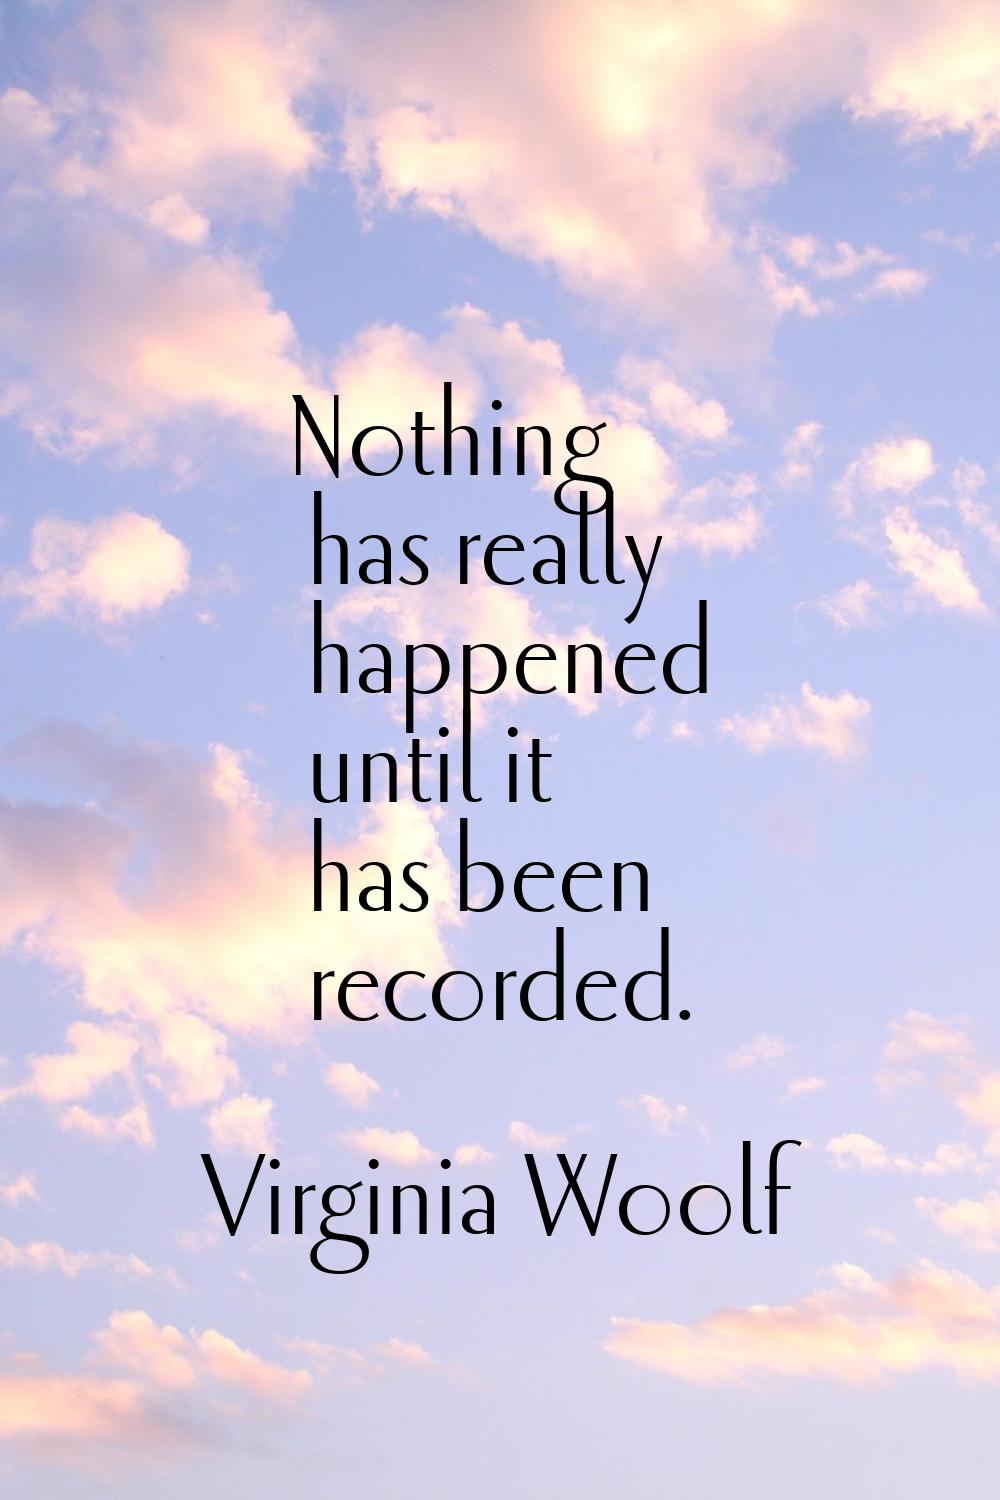 Nothing has really happened until it has been recorded.